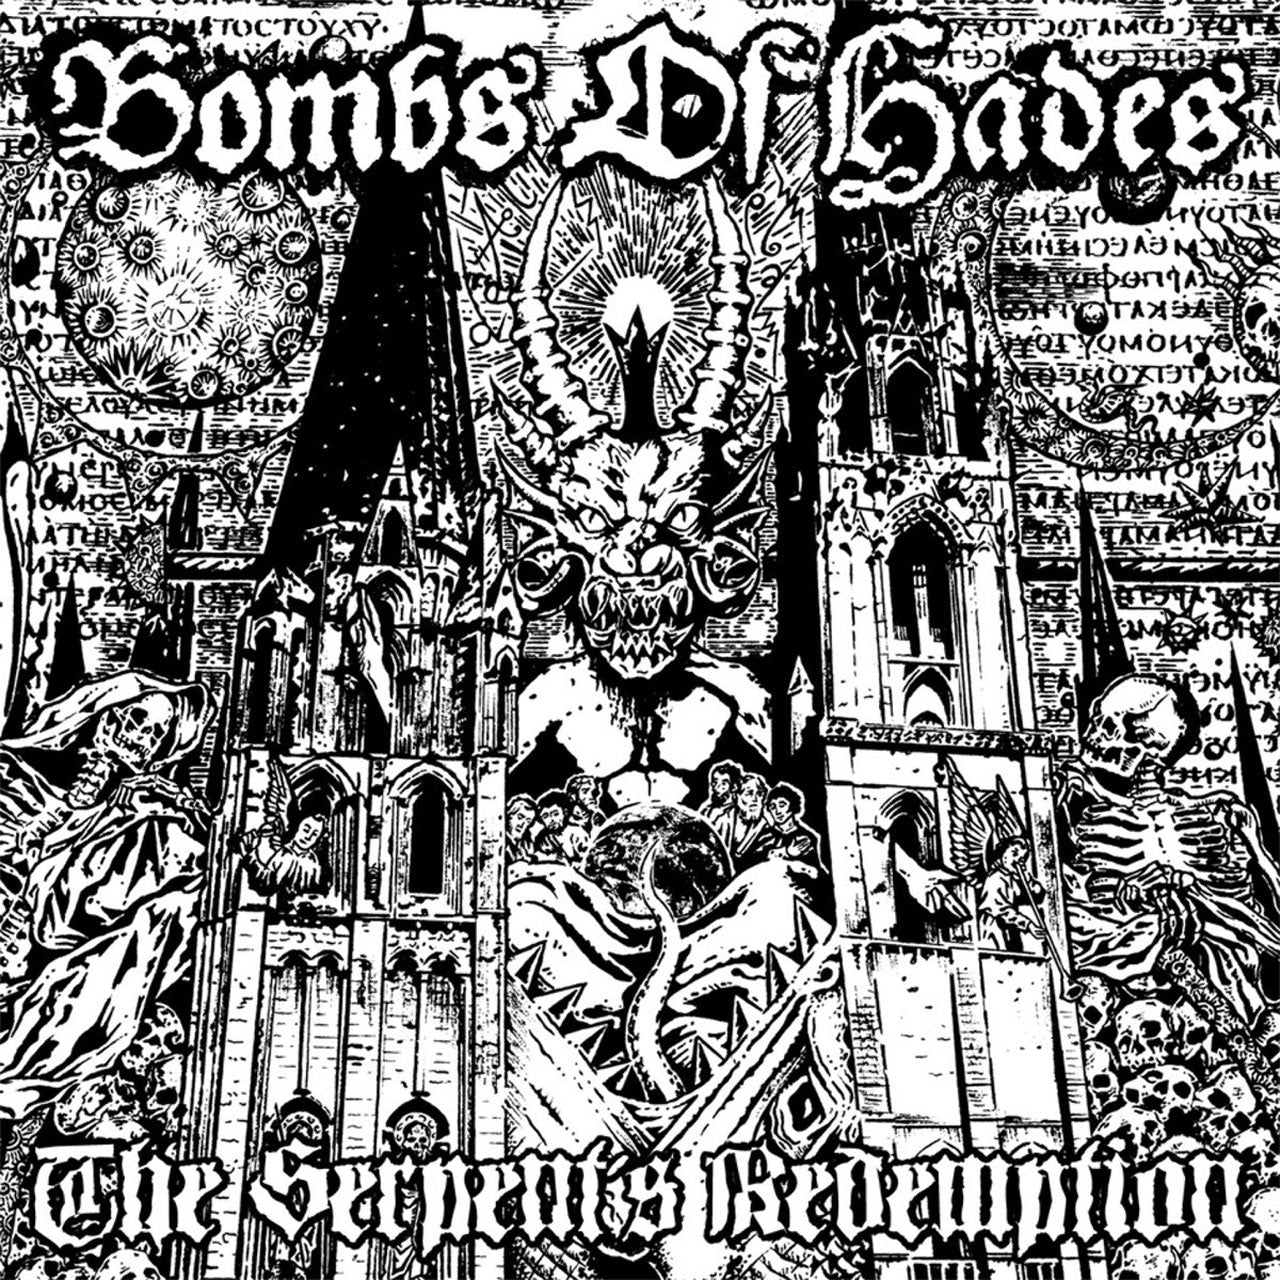 Bombs of Hades - The Serpent's Redemption (CD)